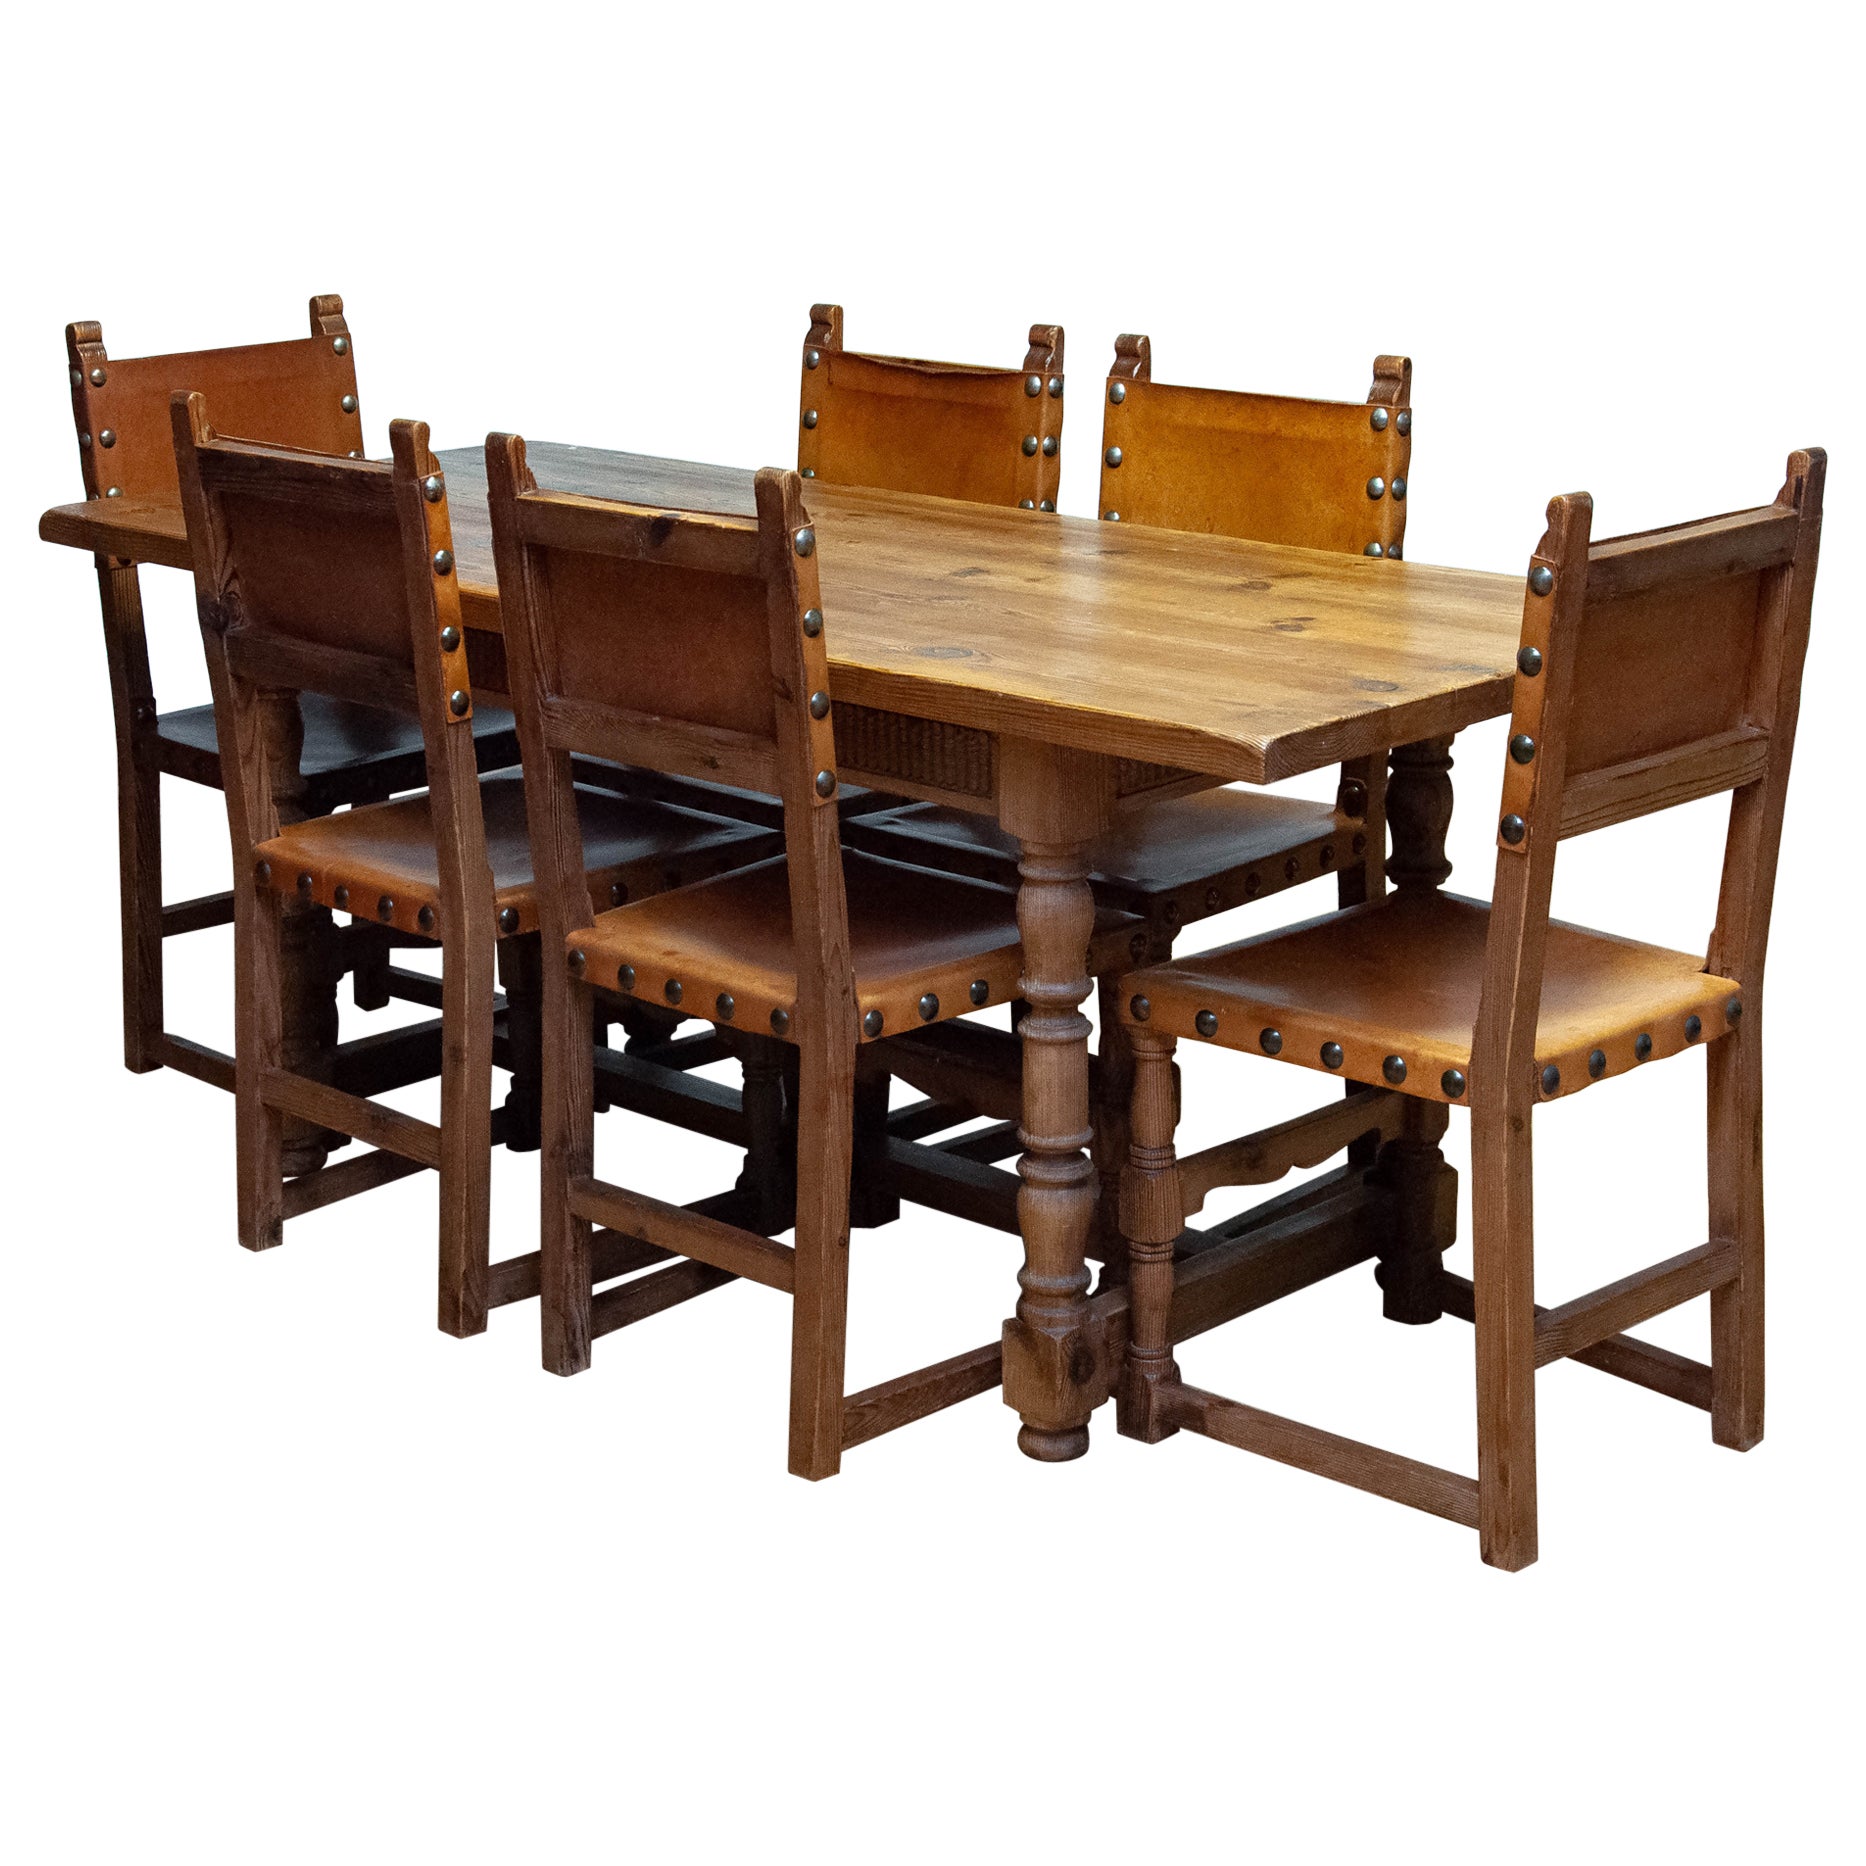 Antique Swedish Folk Art Farm County Dining Table In Pine. Six Chairs In Leather For Sale